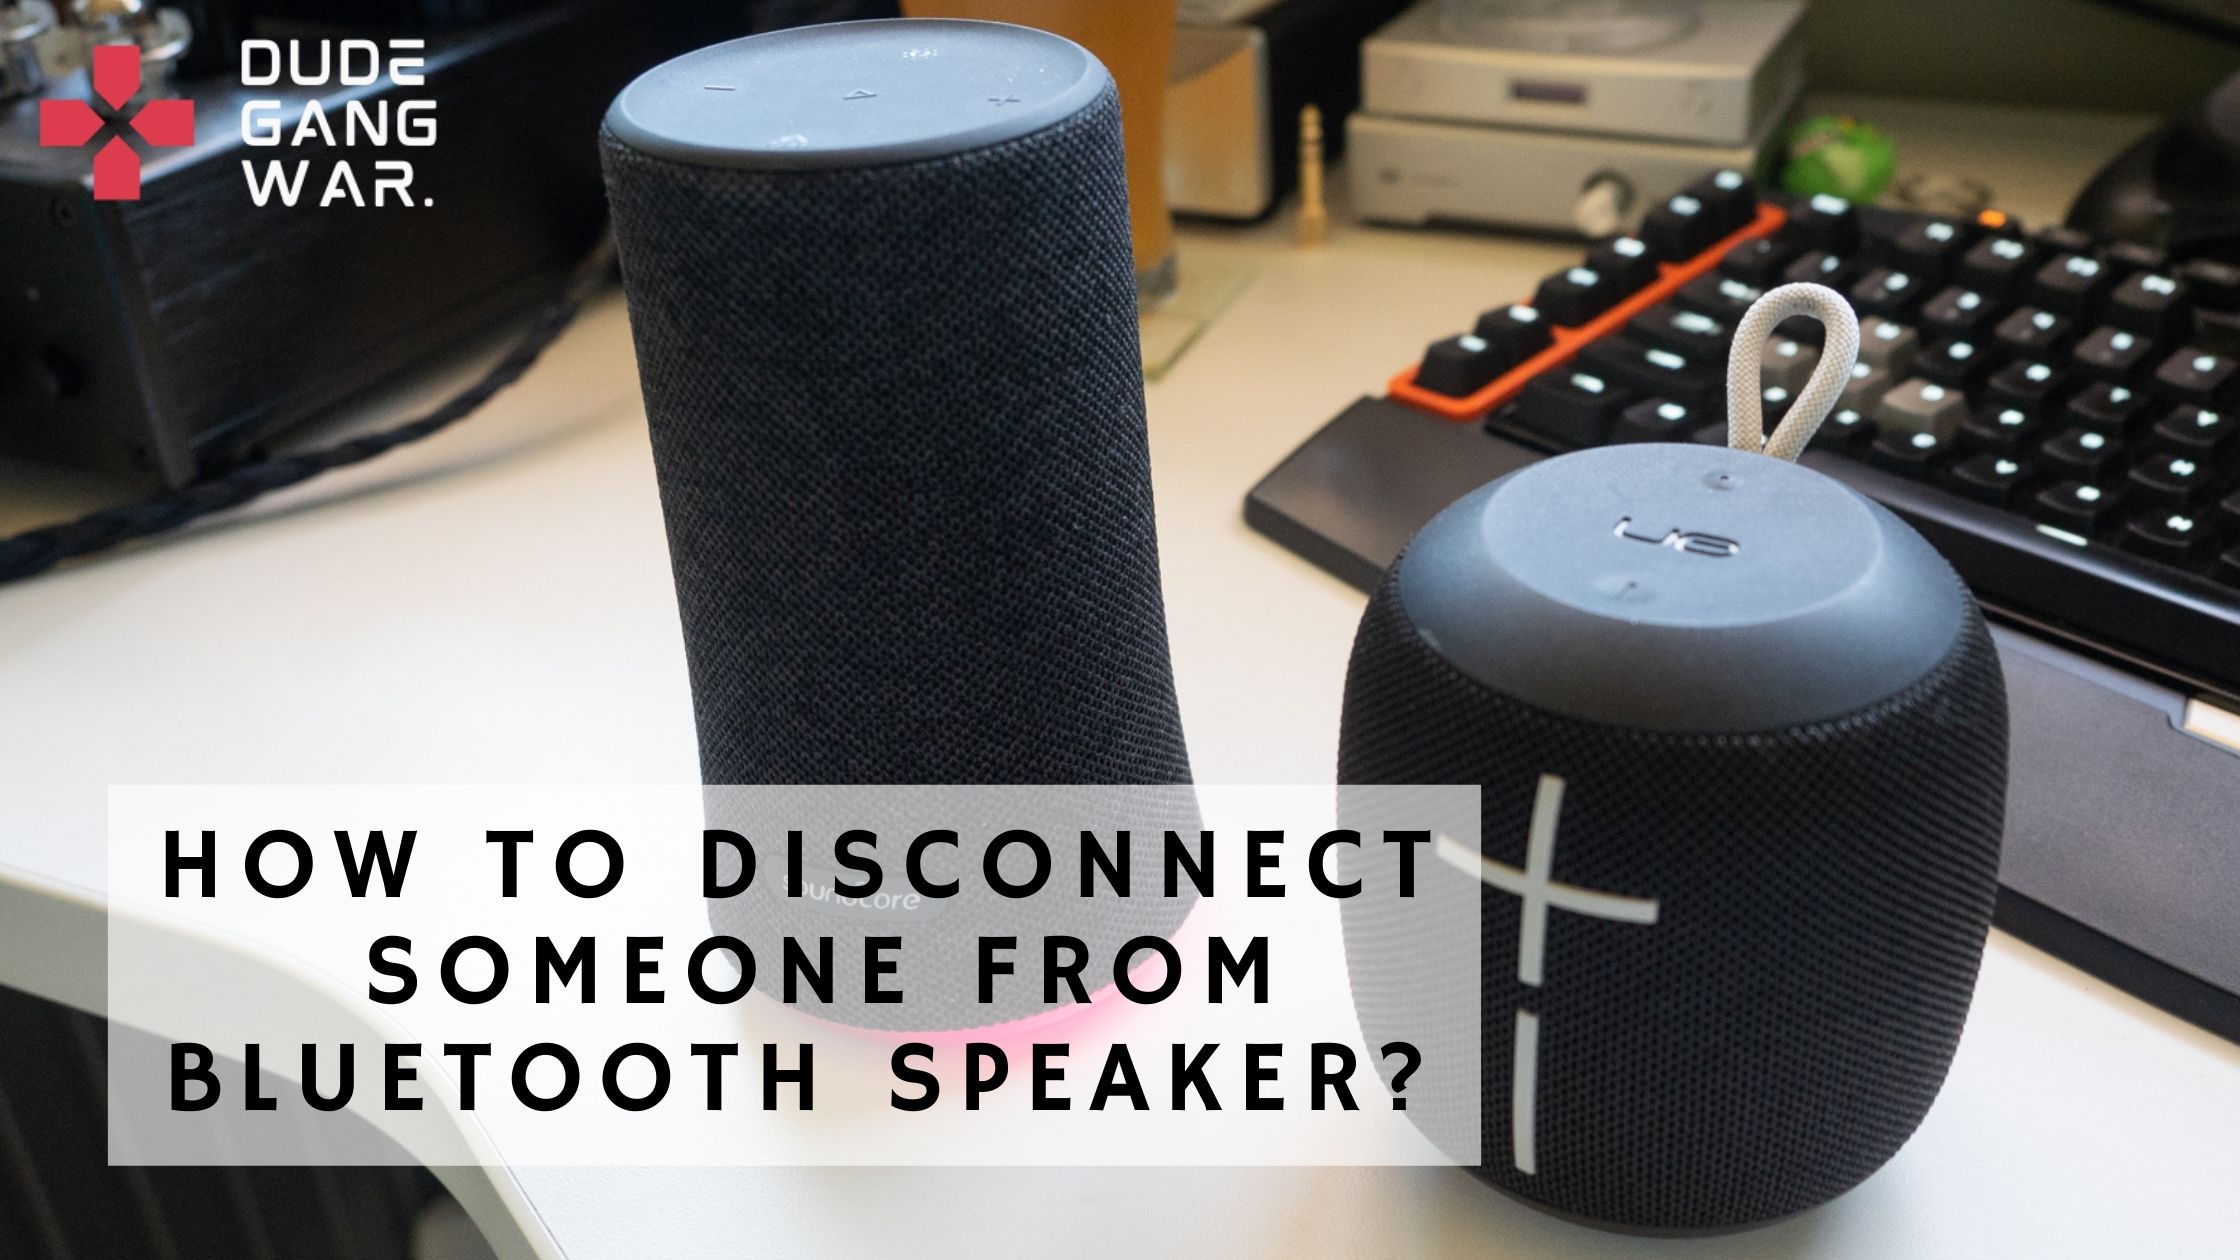 How to disconnect someone from Bluetooth speaker (1)